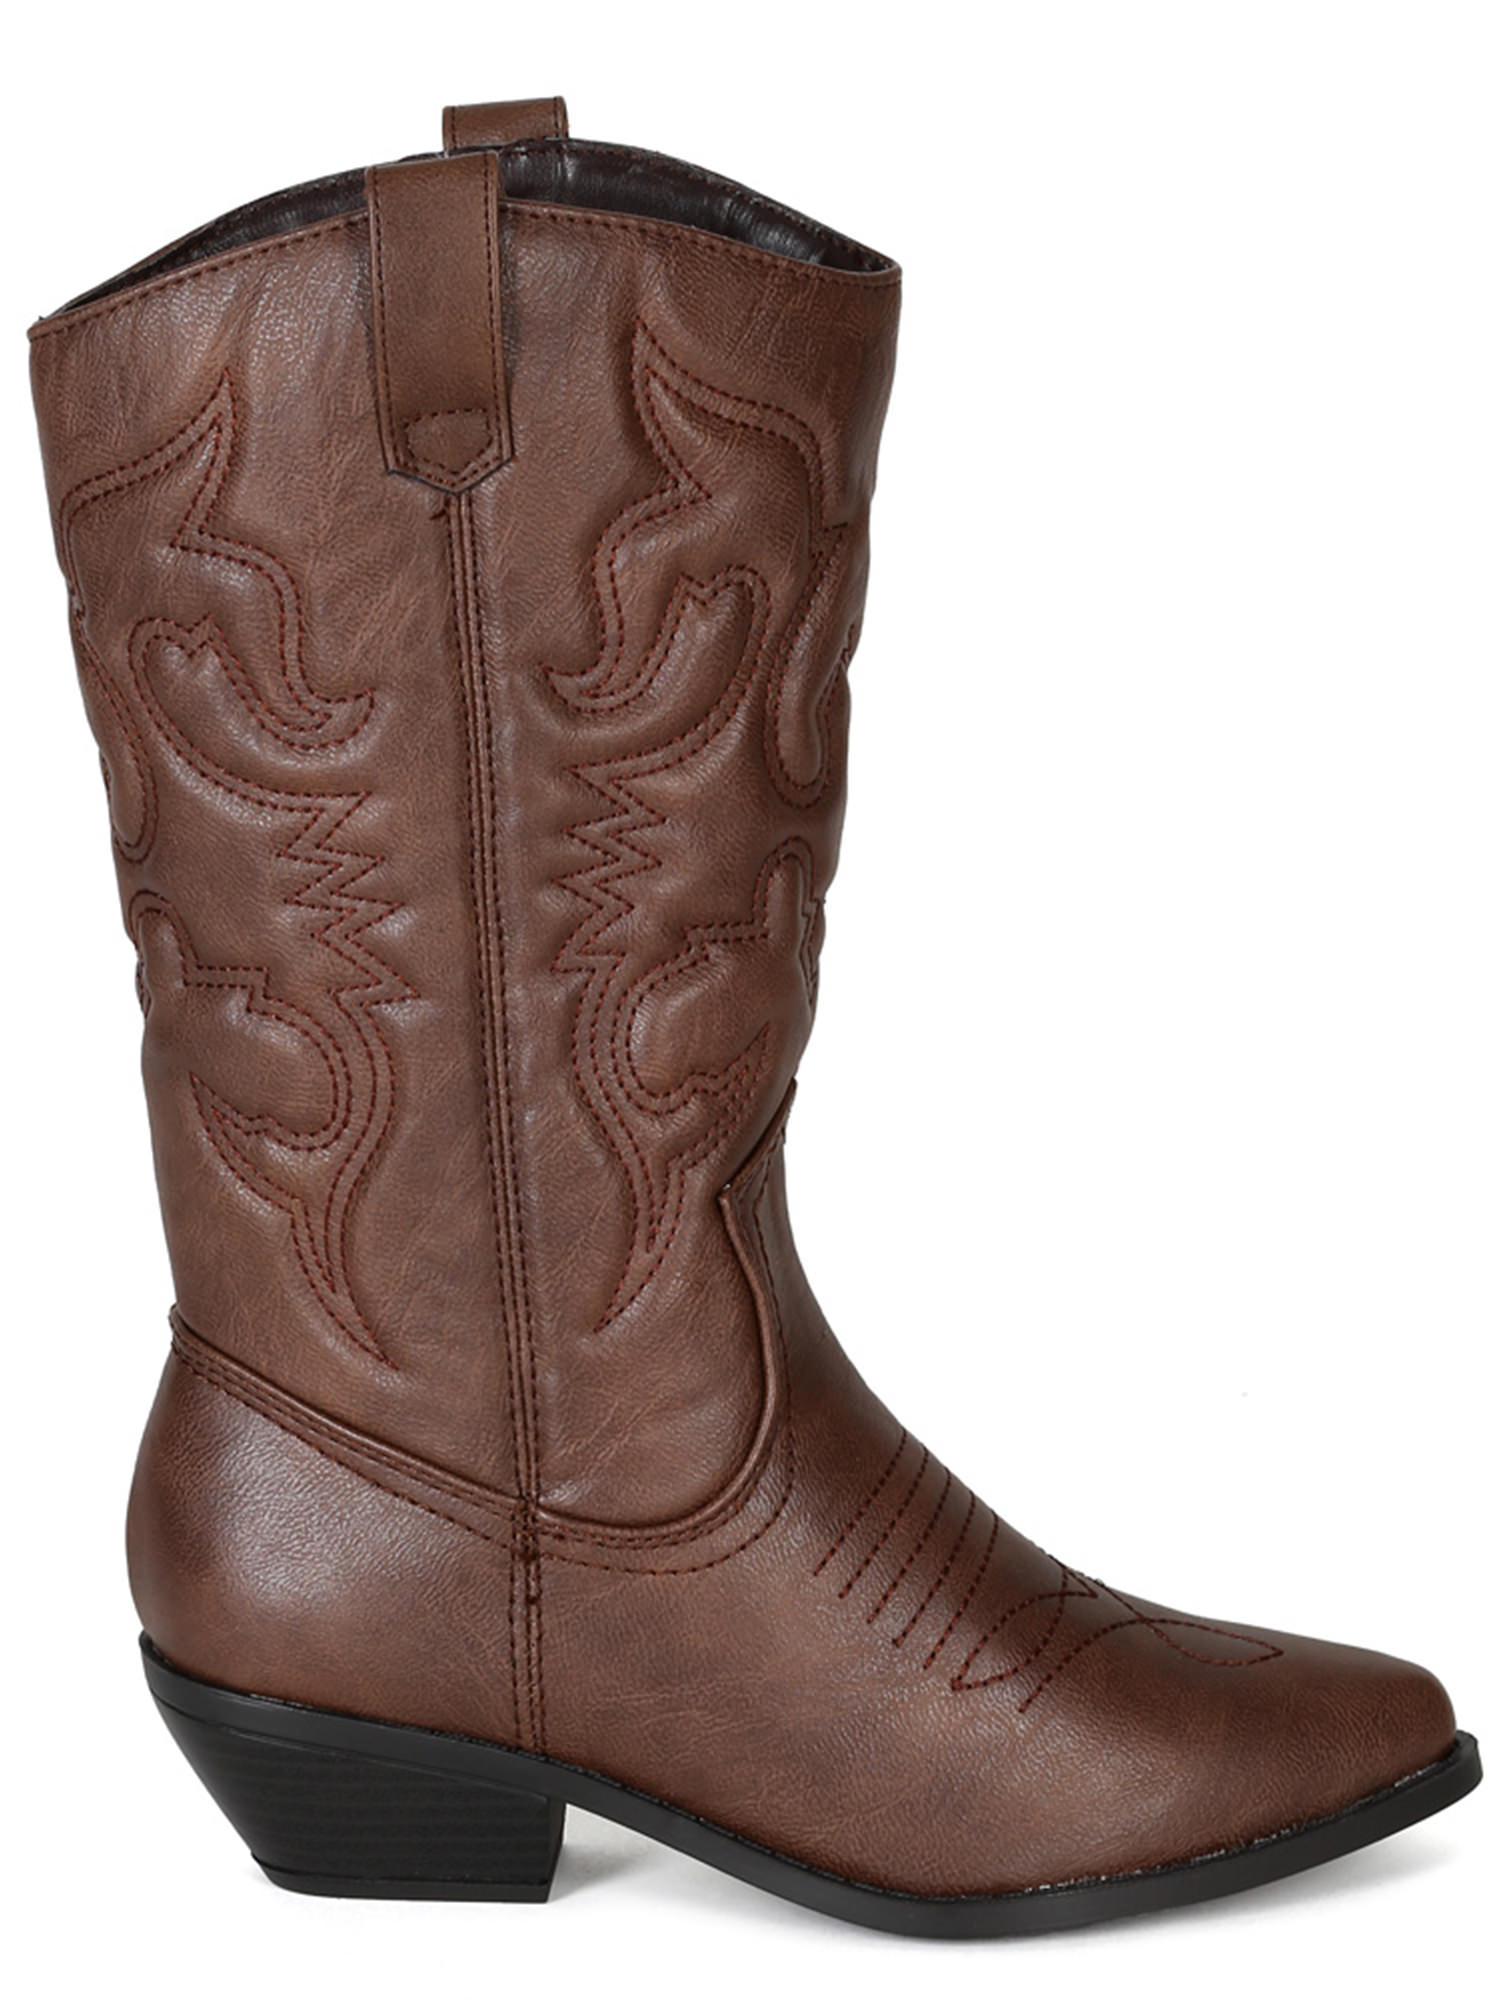 Reno Tan Brwon Soda Cowboy Western Stitched Boots Women Cowgirl Boots Pointy Toe Knee High - image 2 of 3